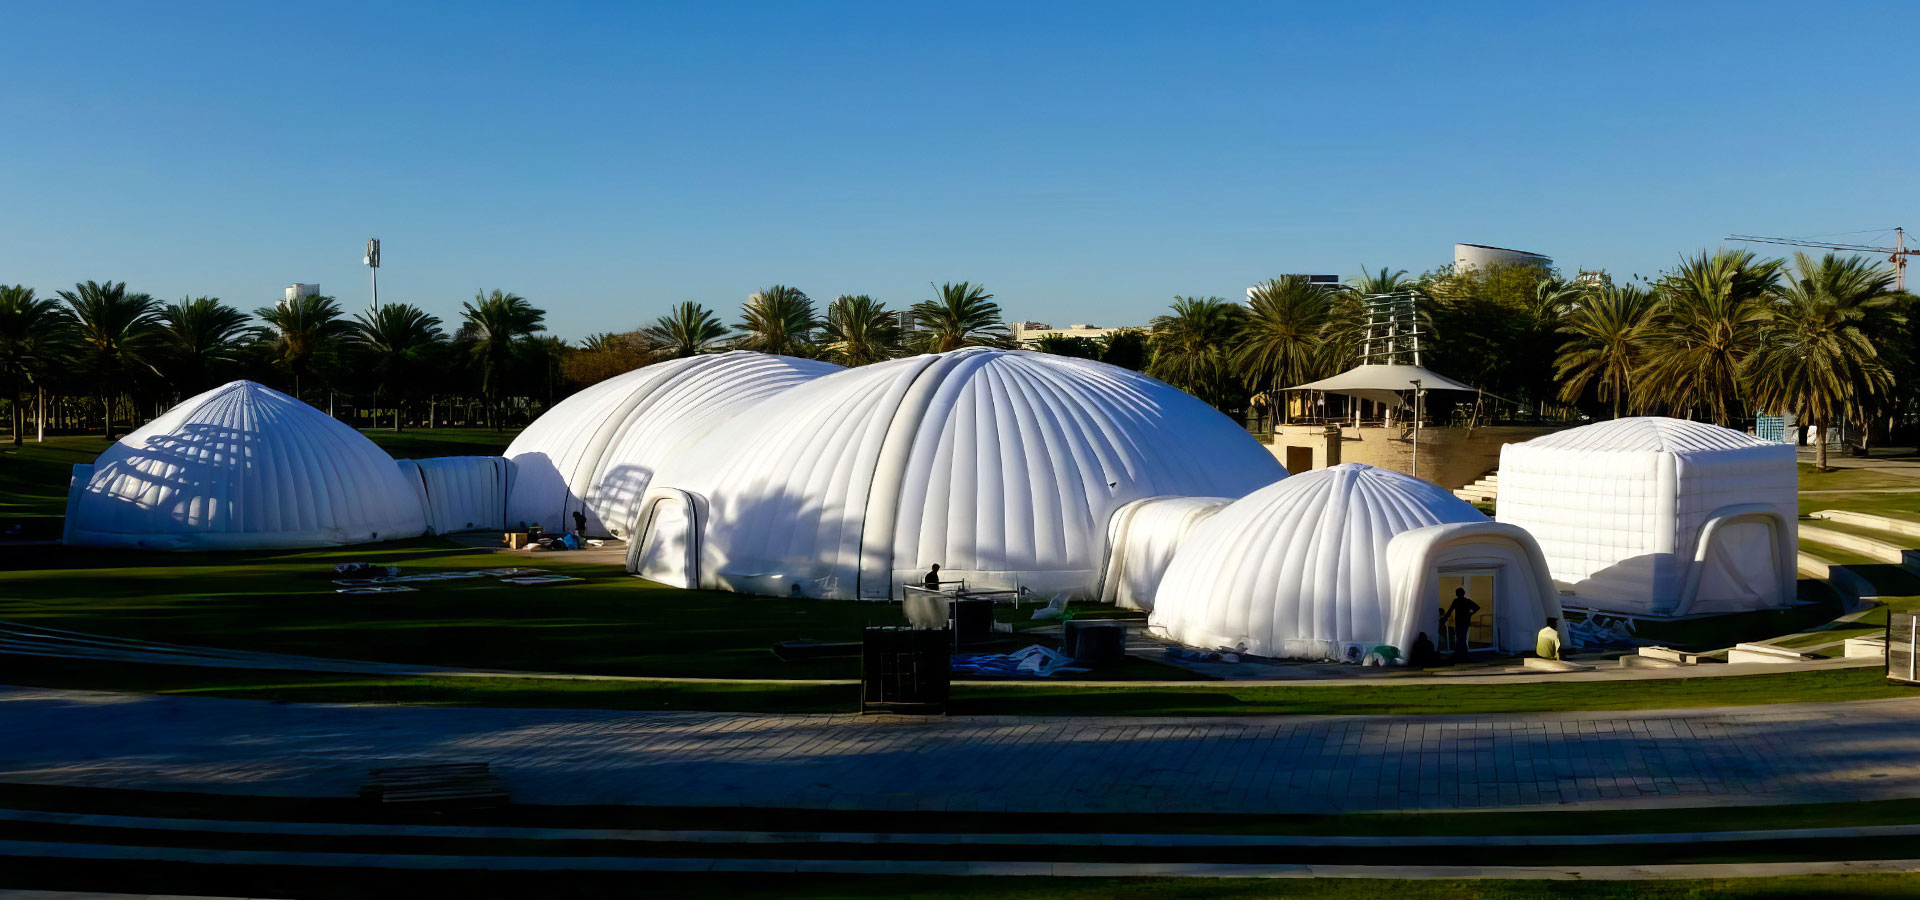 Pic showing a configuration of different shaped and sized Created By Air inflatable structures connected together at an event in Dubai shown during the day